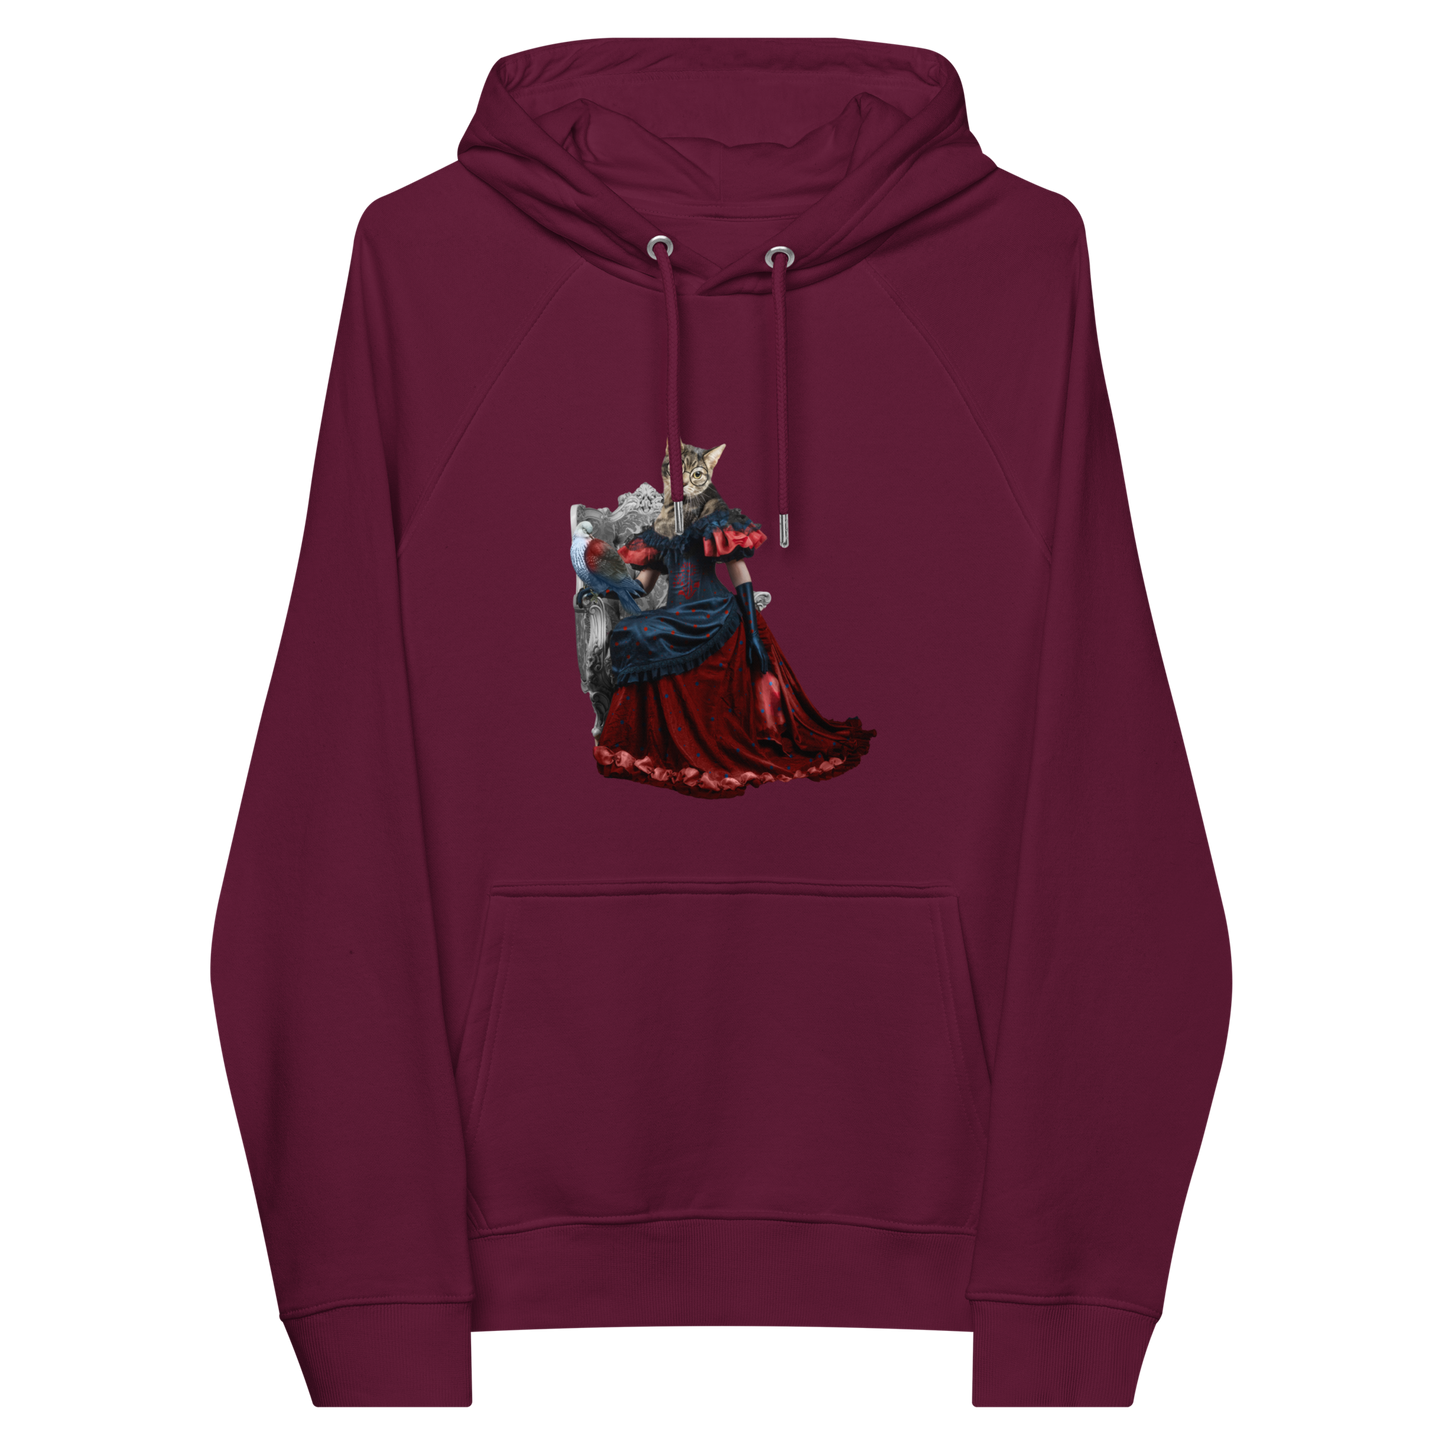 Burgundy Anthropomorphic Cat Raglan Hoodie featuring an adorable Anthropomorphic Cat graphic on the chest - Cute Graphic Cat Hoodies - Boozy Fox